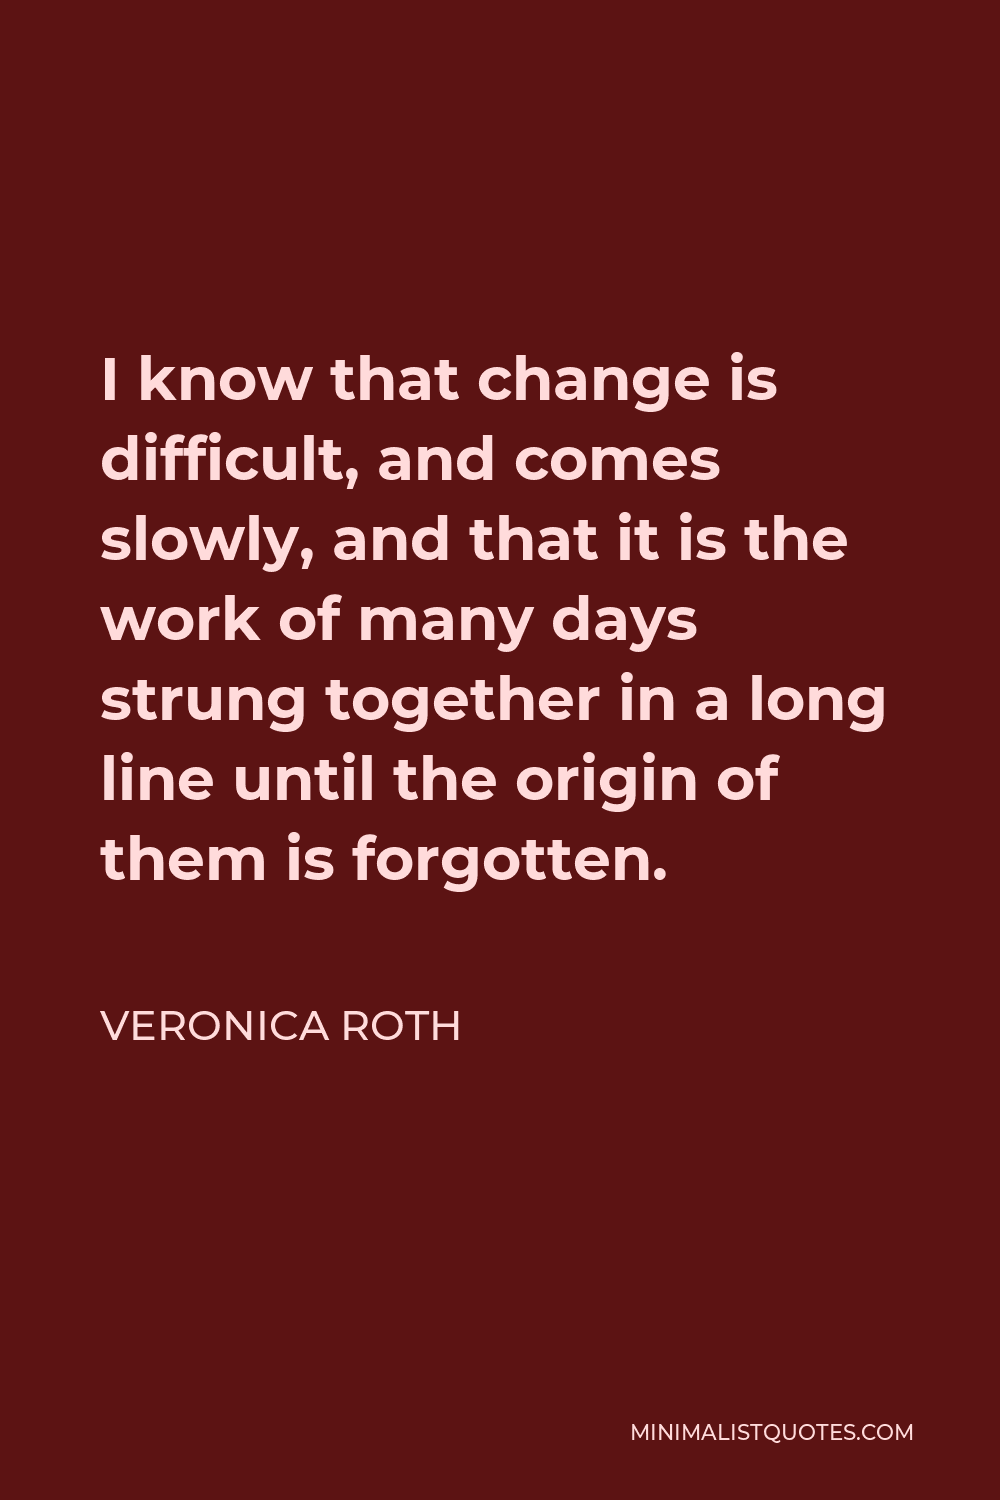 Veronica Roth Quote - I know that change is difficult, and comes slowly, and that it is the work of many days strung together in a long line until the origin of them is forgotten.